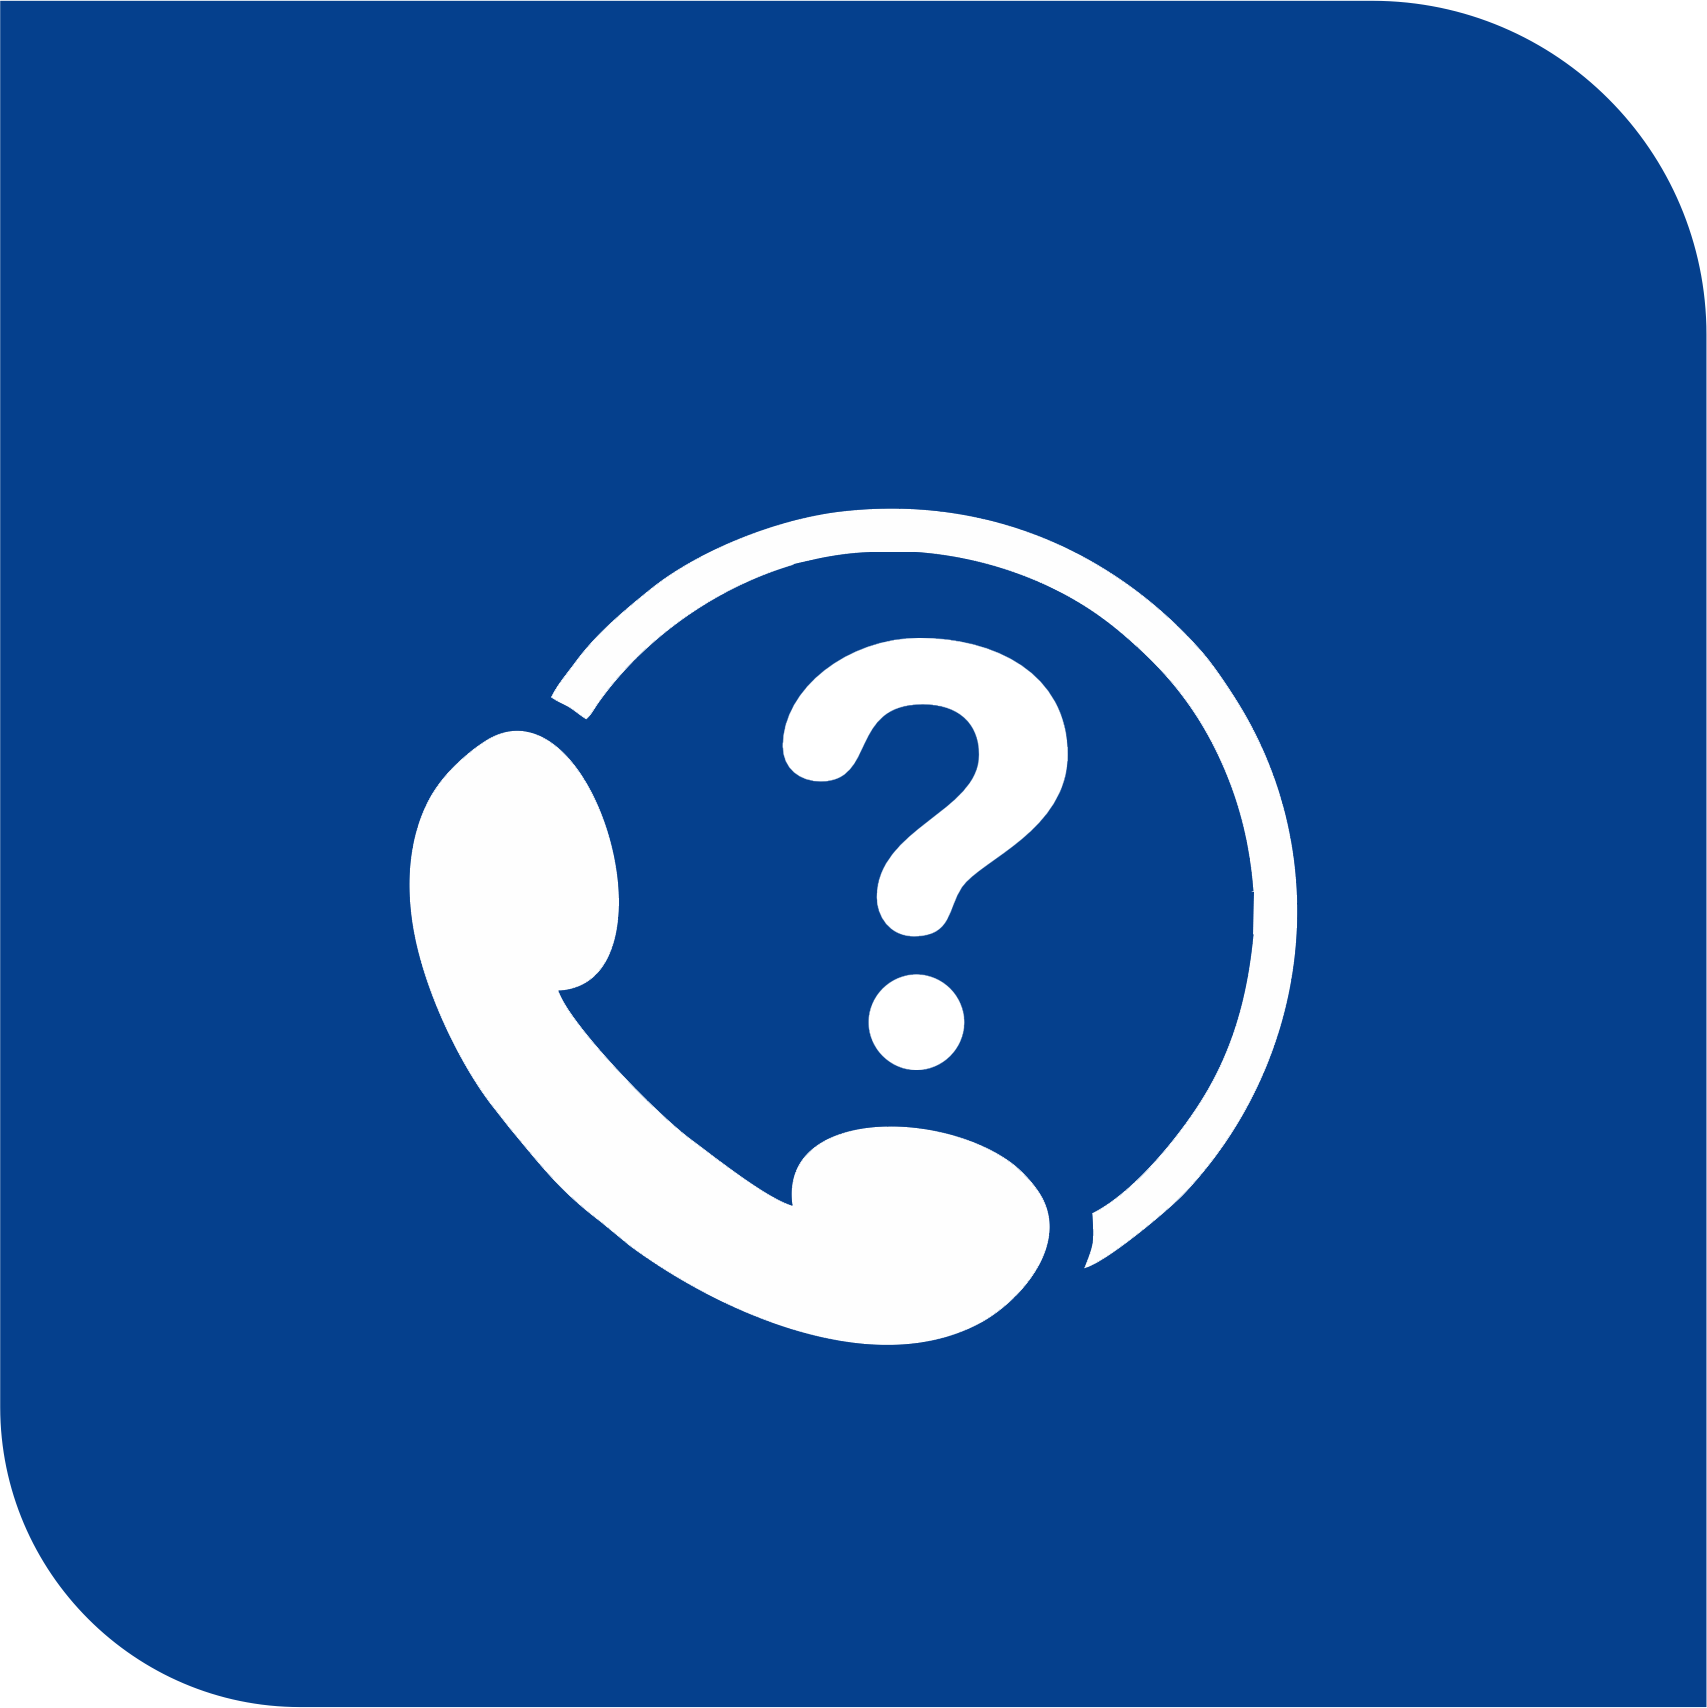 telephone answering service question mark